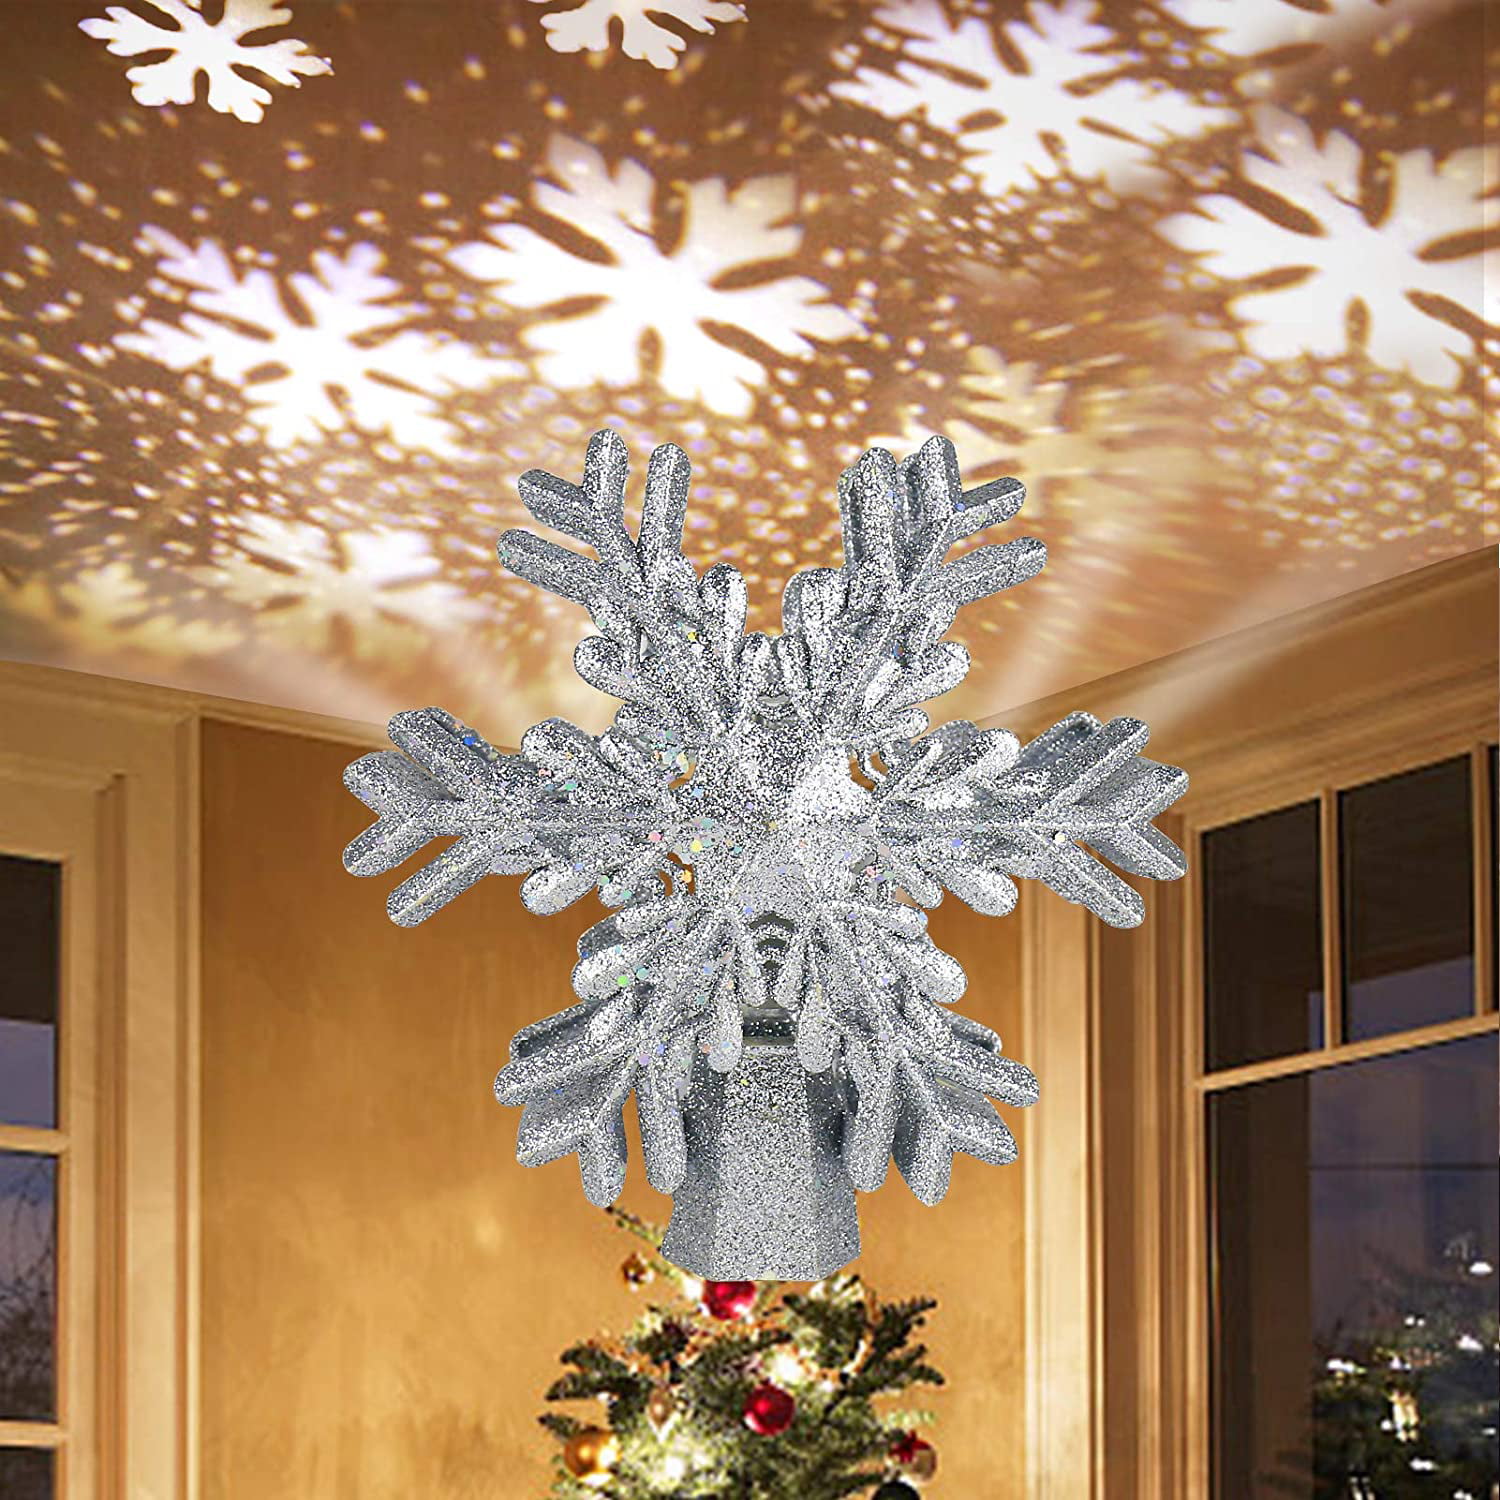 Xmas Hollow Paper Star Hanging Christmas Bar Ceiling Wedding Party Home Decor 